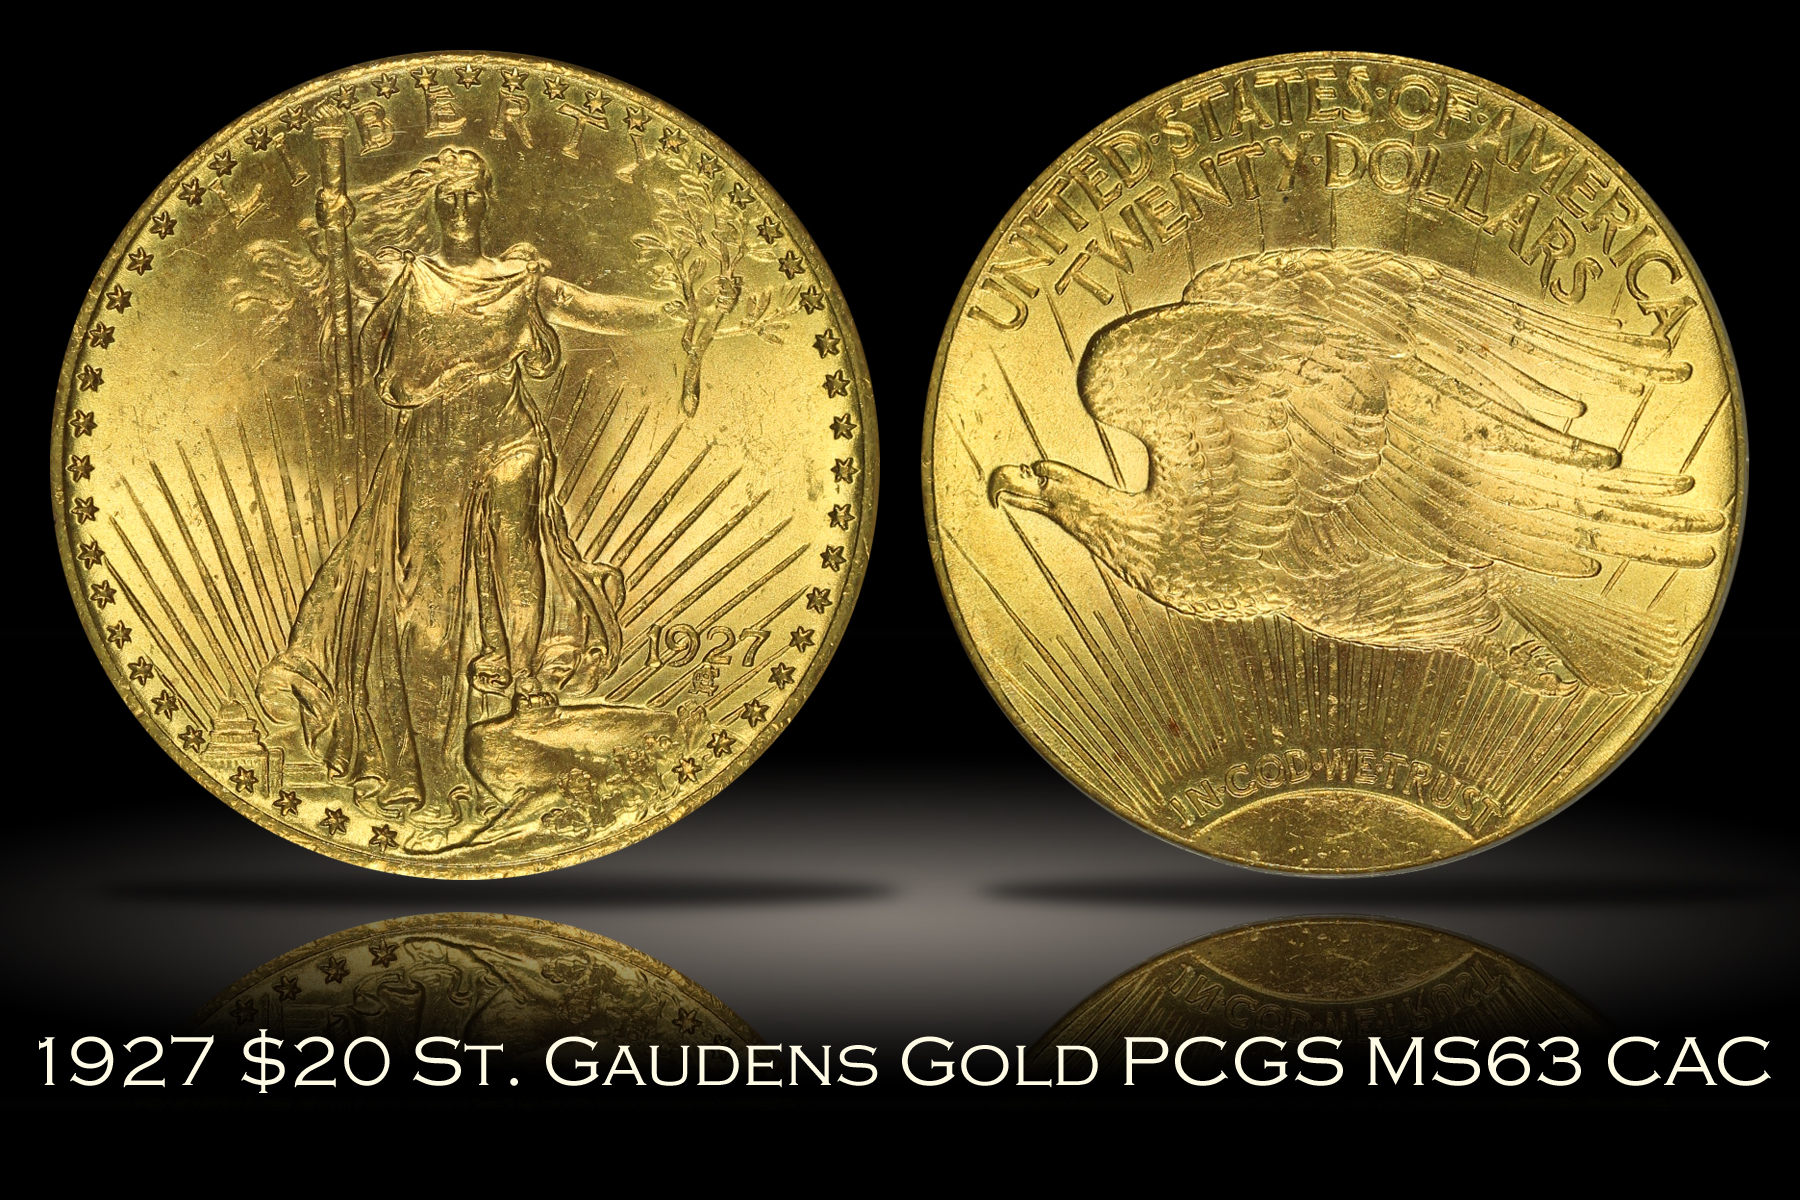 1927 $20 St. Gaudens Gold PCGS MS63 CAC OGH